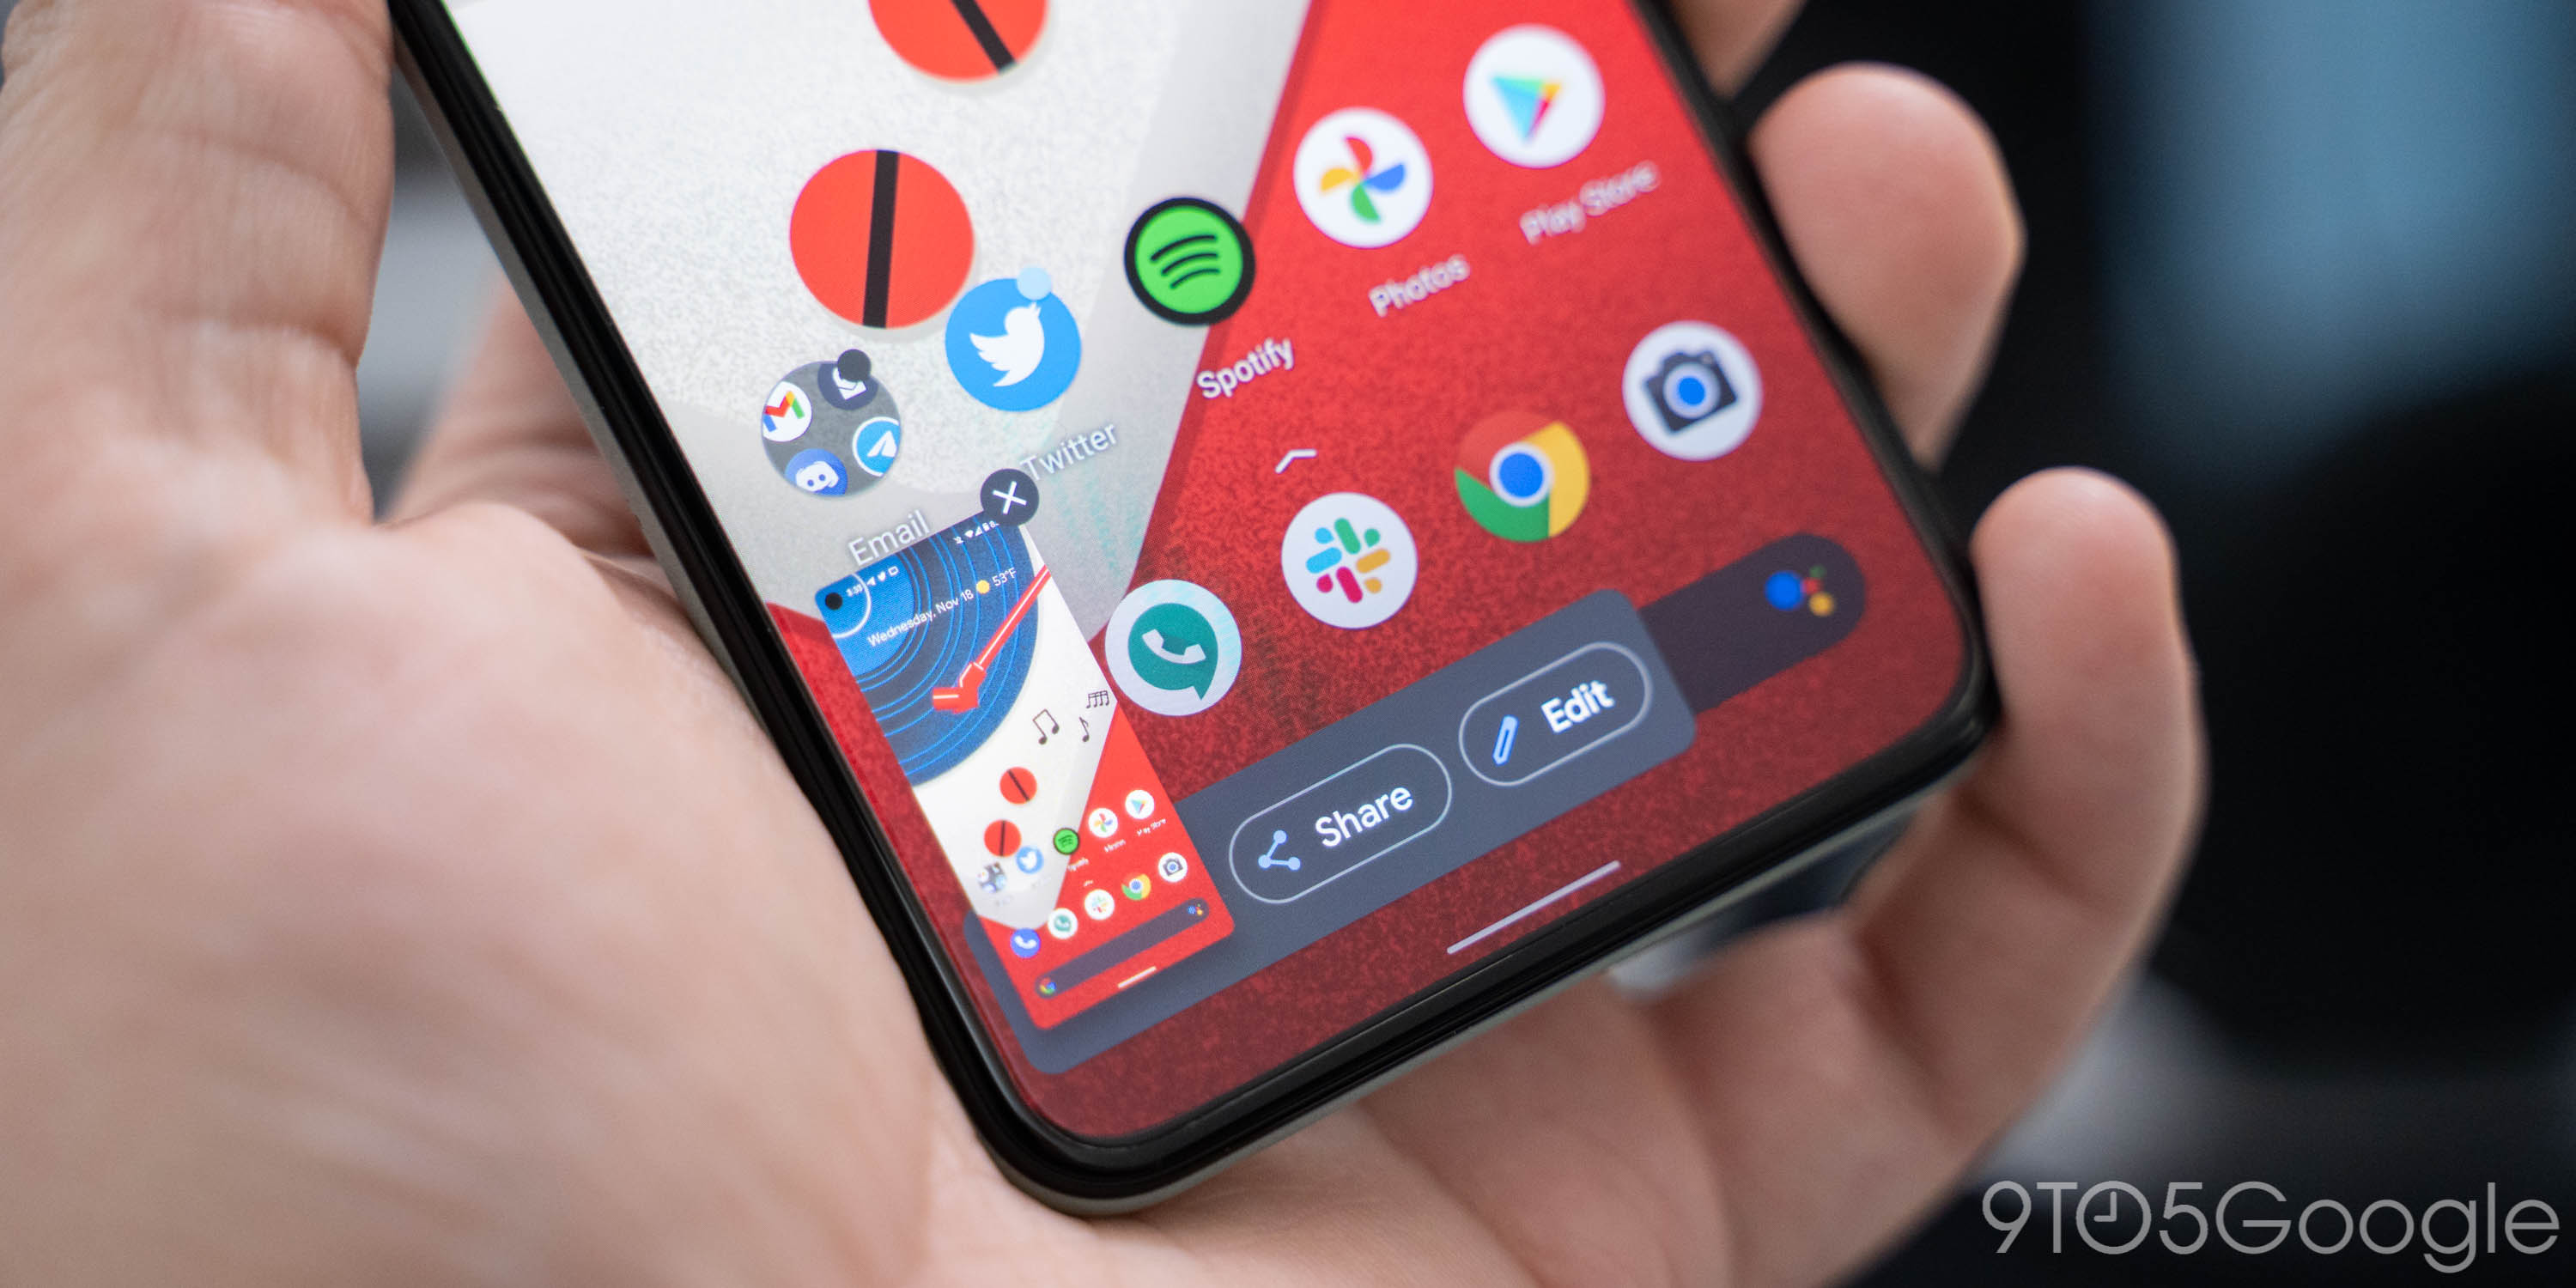 How to take a screenshot on Android - Samsung Galaxy, Pixel 11to11Google